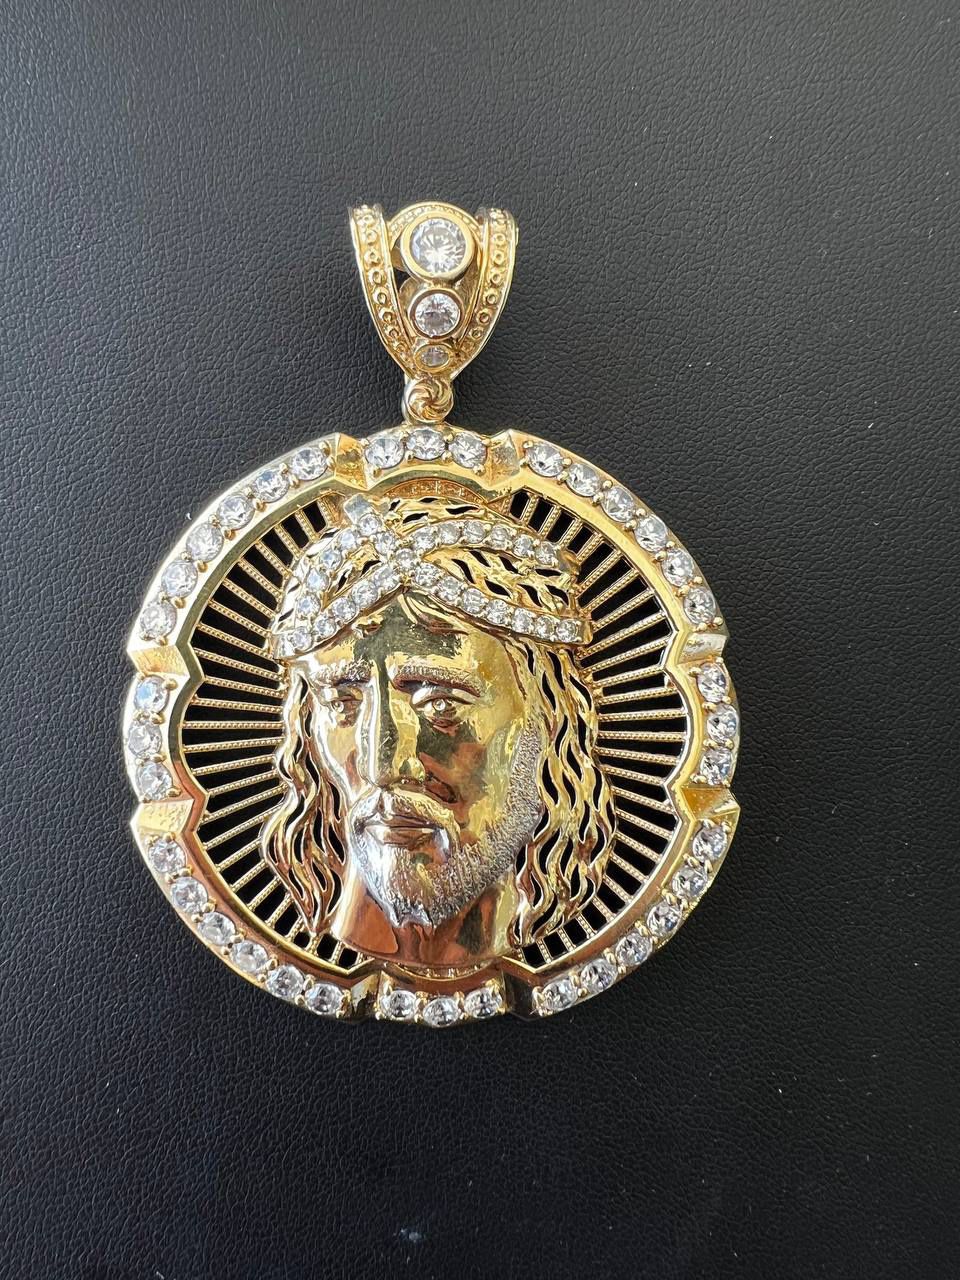 Big Jesus head pendant made of 10k solid gold and CZ stones